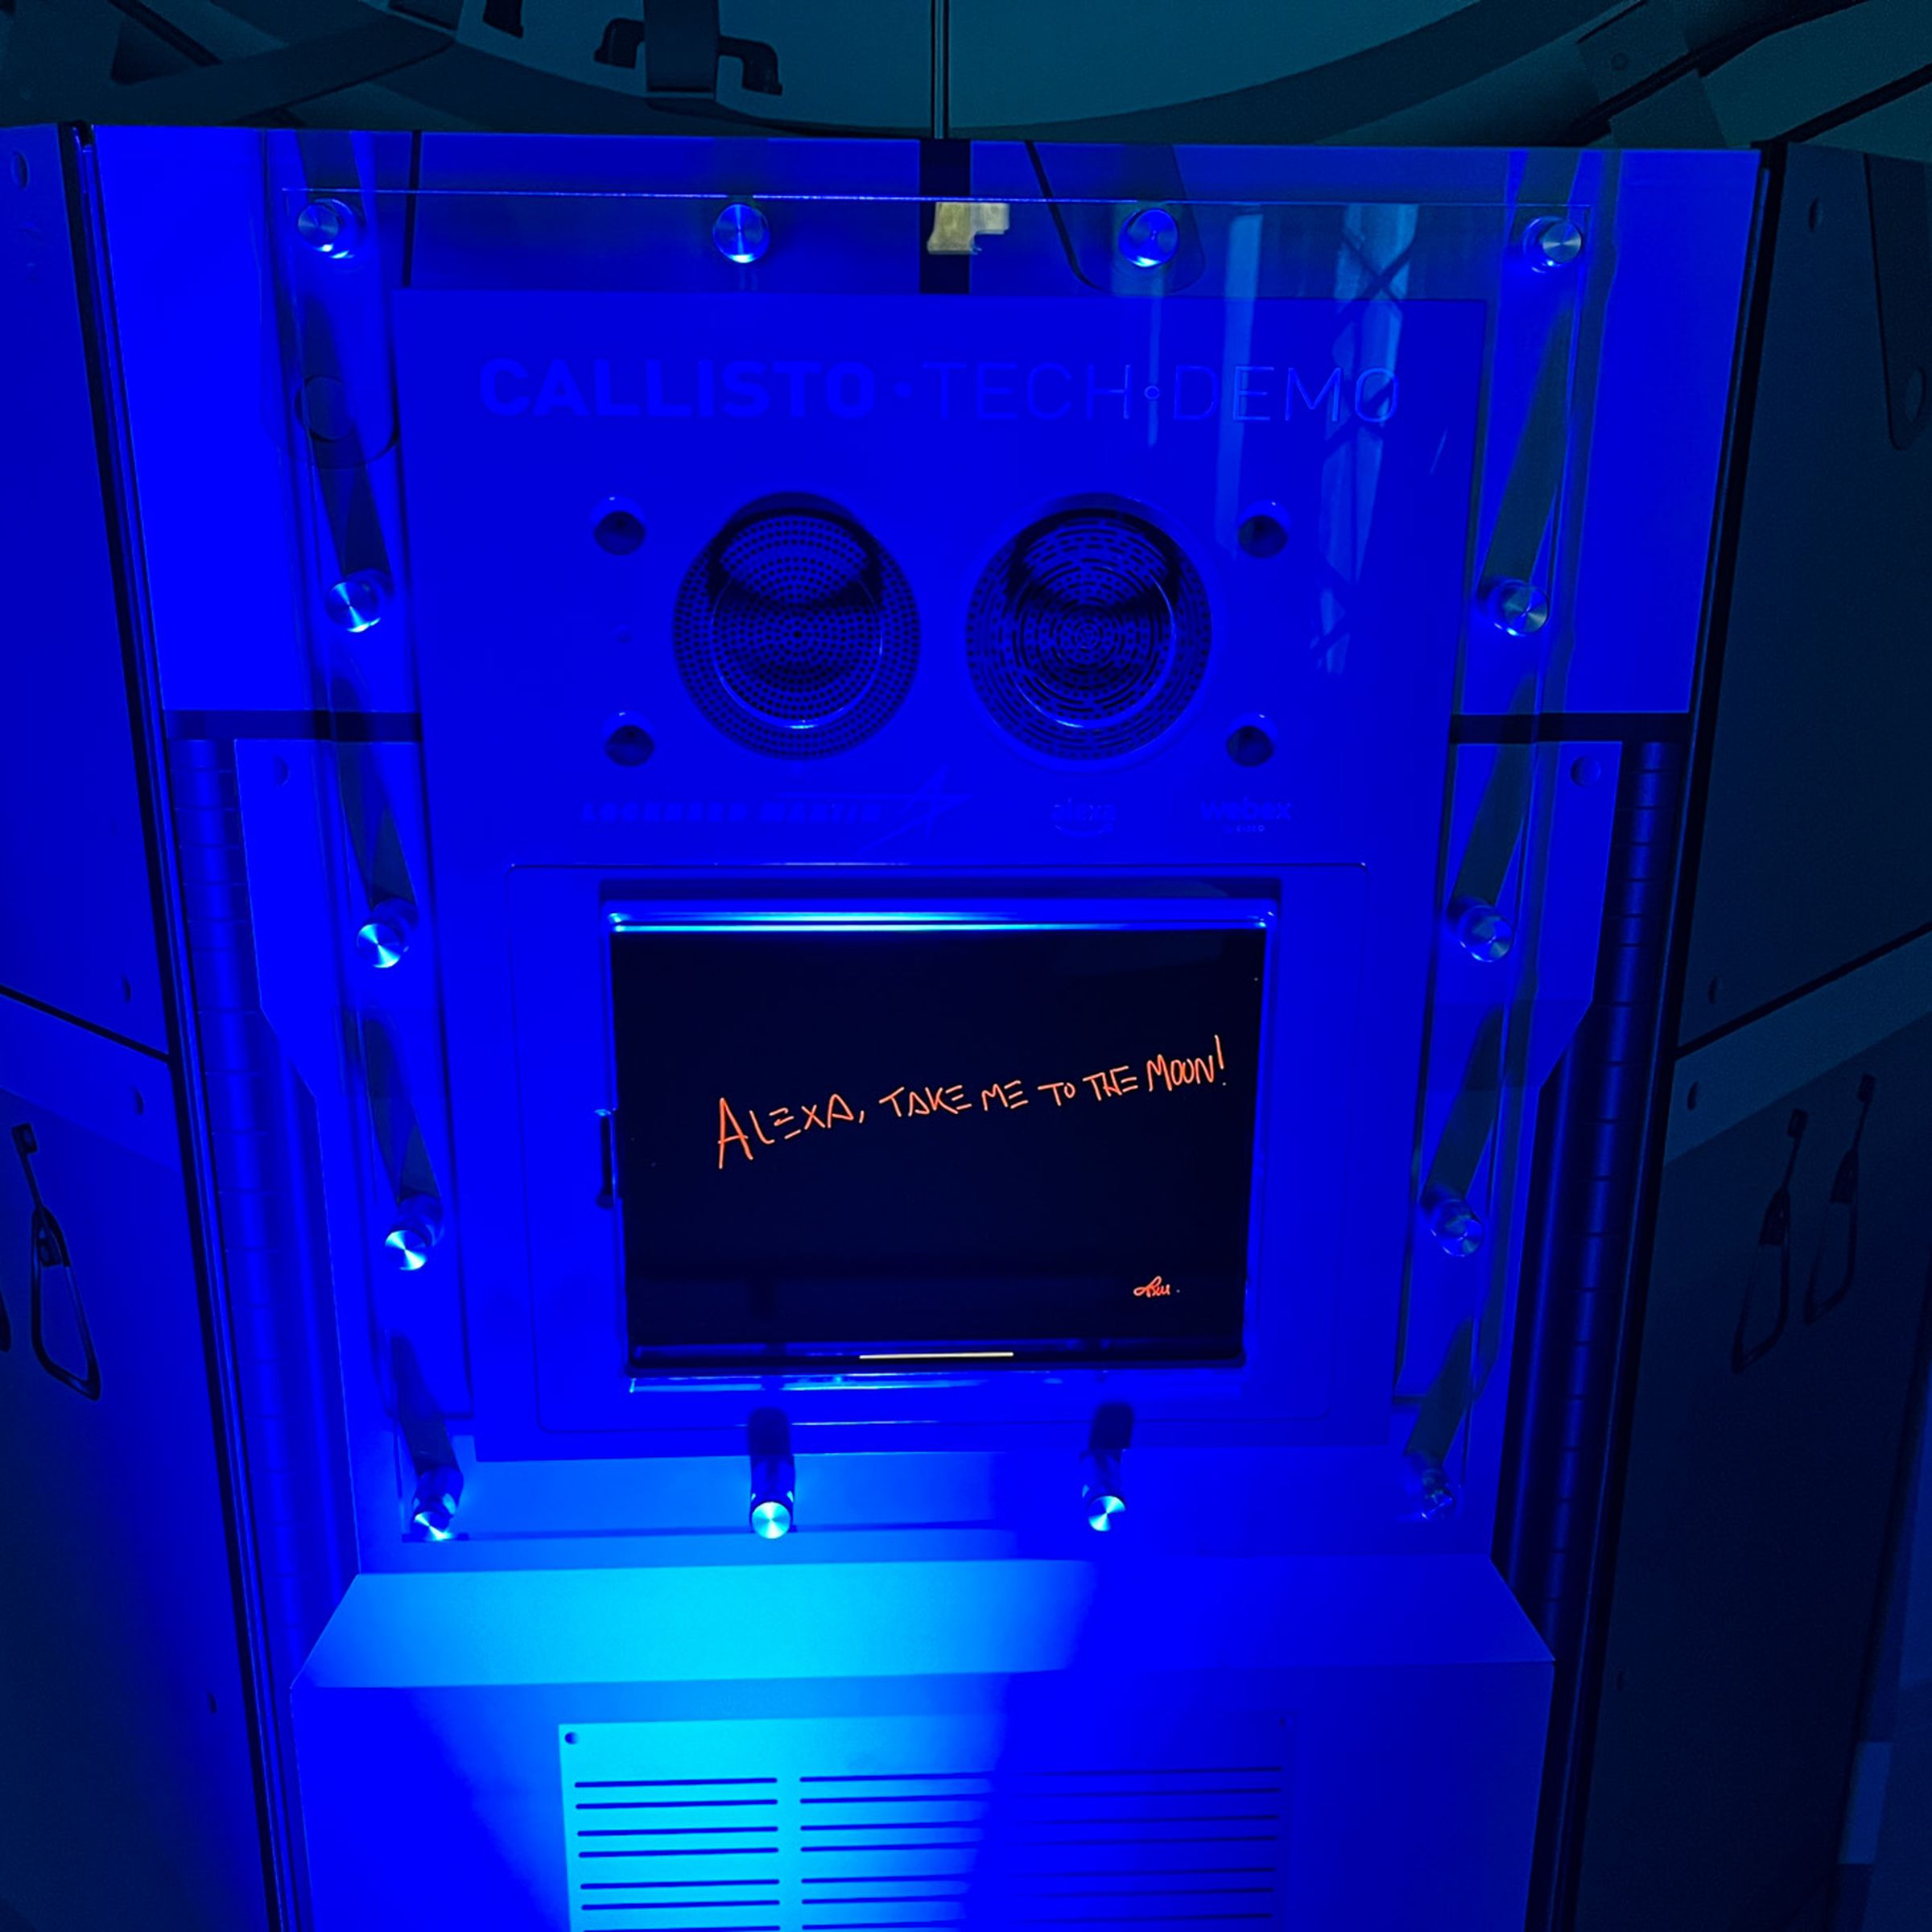 A demo version of the Callisto technology payload on the Orion. The device includes Amazon’s Alexa voice assistant and an iPad running Webex.